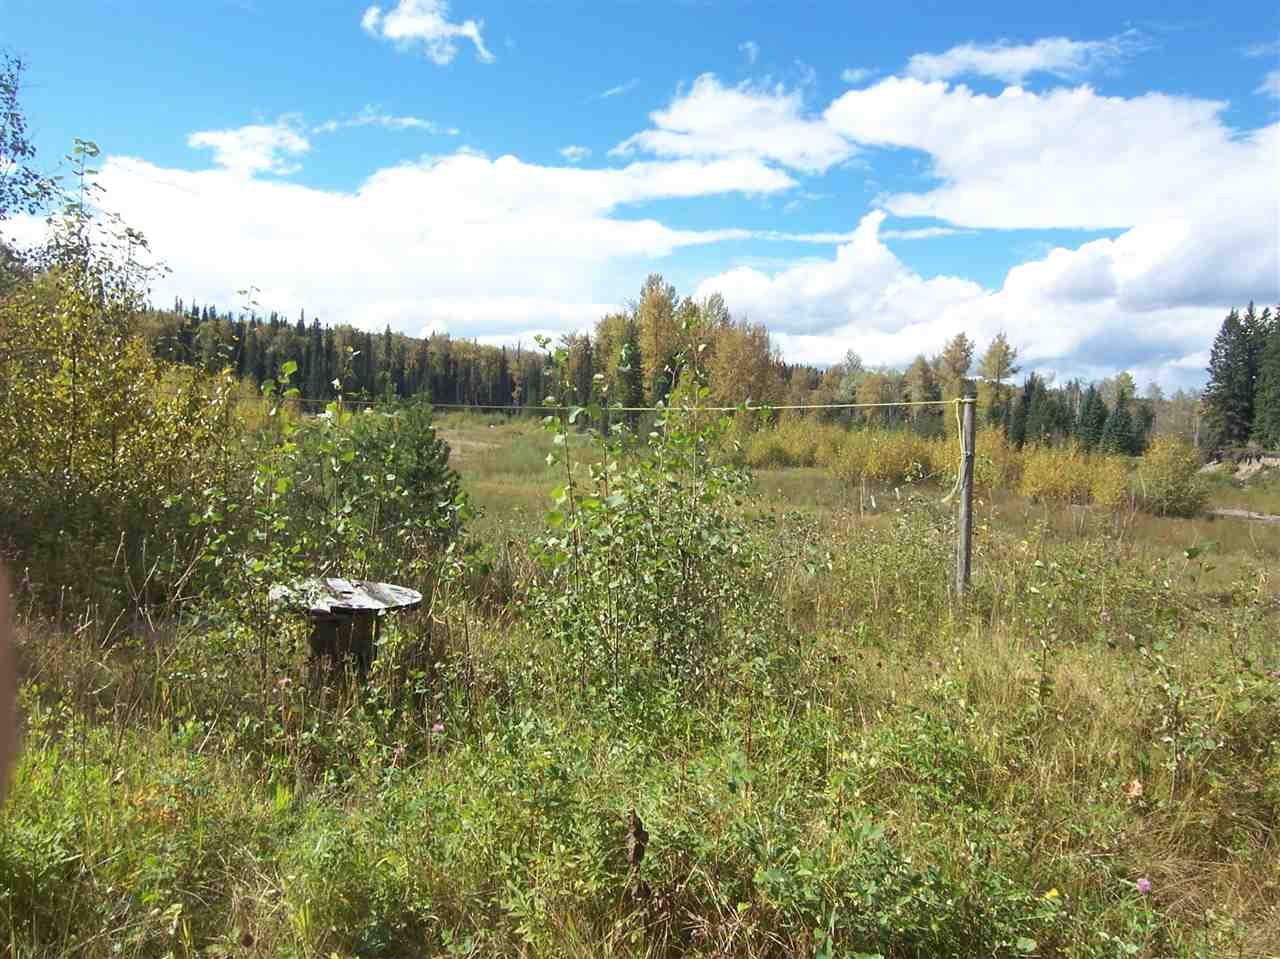 Photo 8: Photos: 4682 BARKERVILLE Highway in Quesnel: Quesnel - Rural North Land for sale (Quesnel (Zone 28))  : MLS®# R2105293